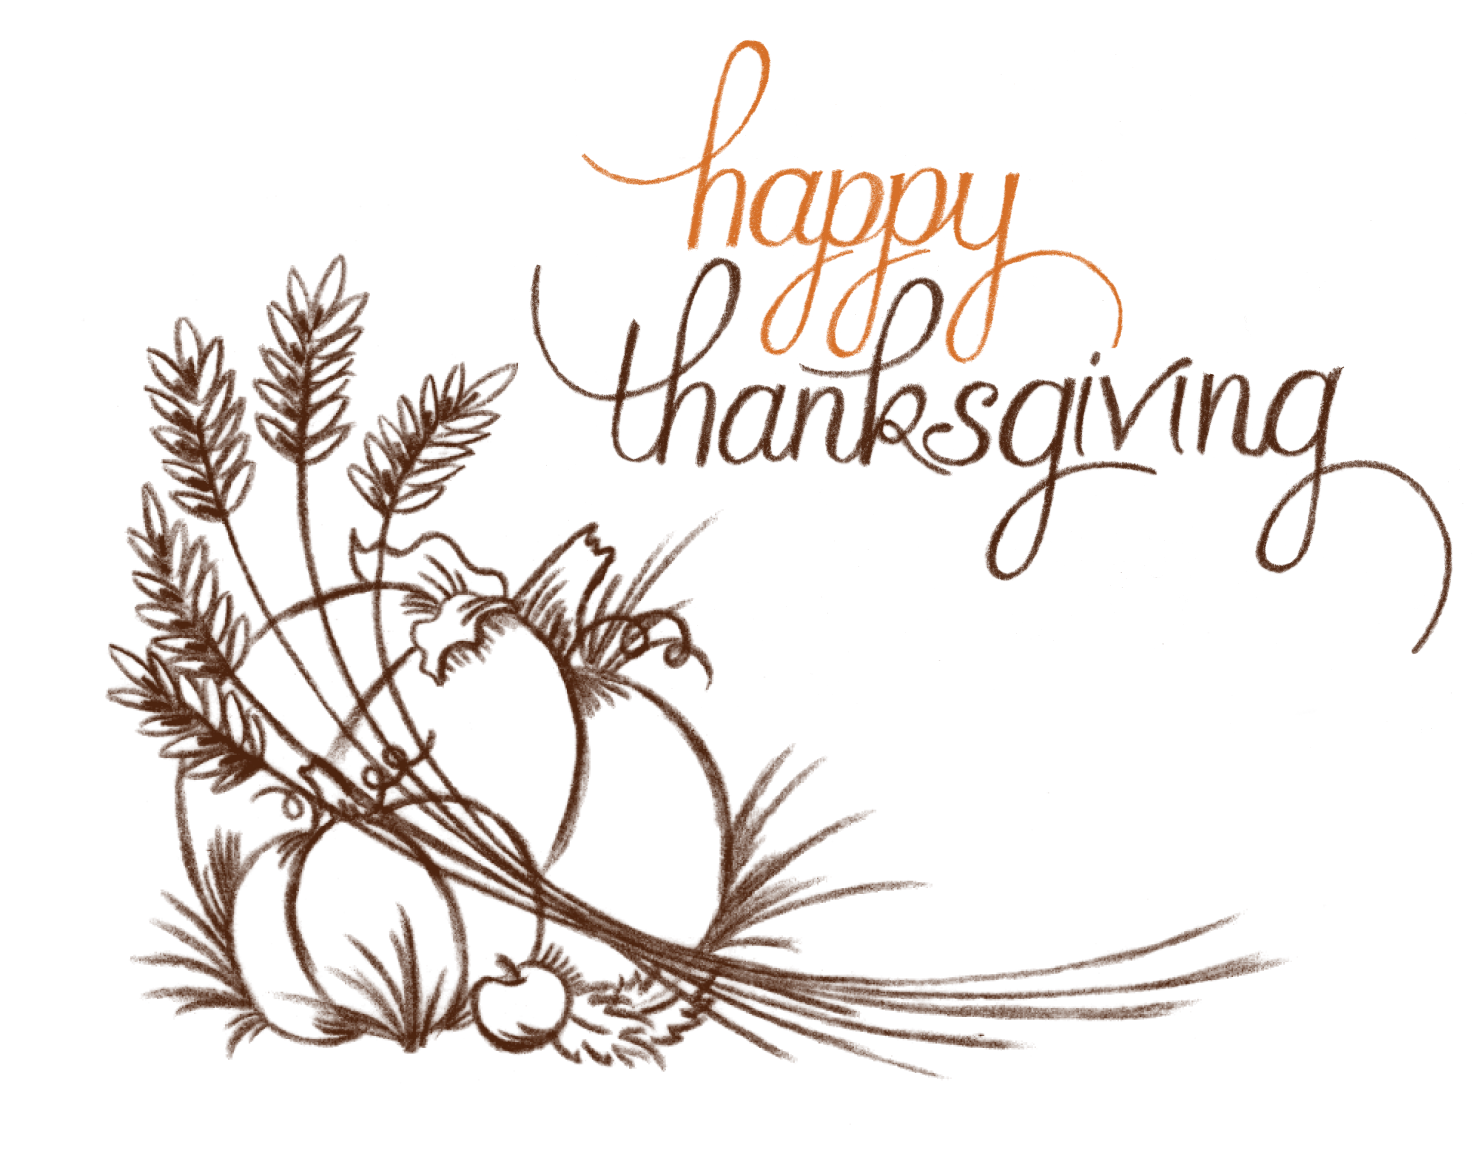 Enjoy the Thanksgiving Holiday with Family and Friends